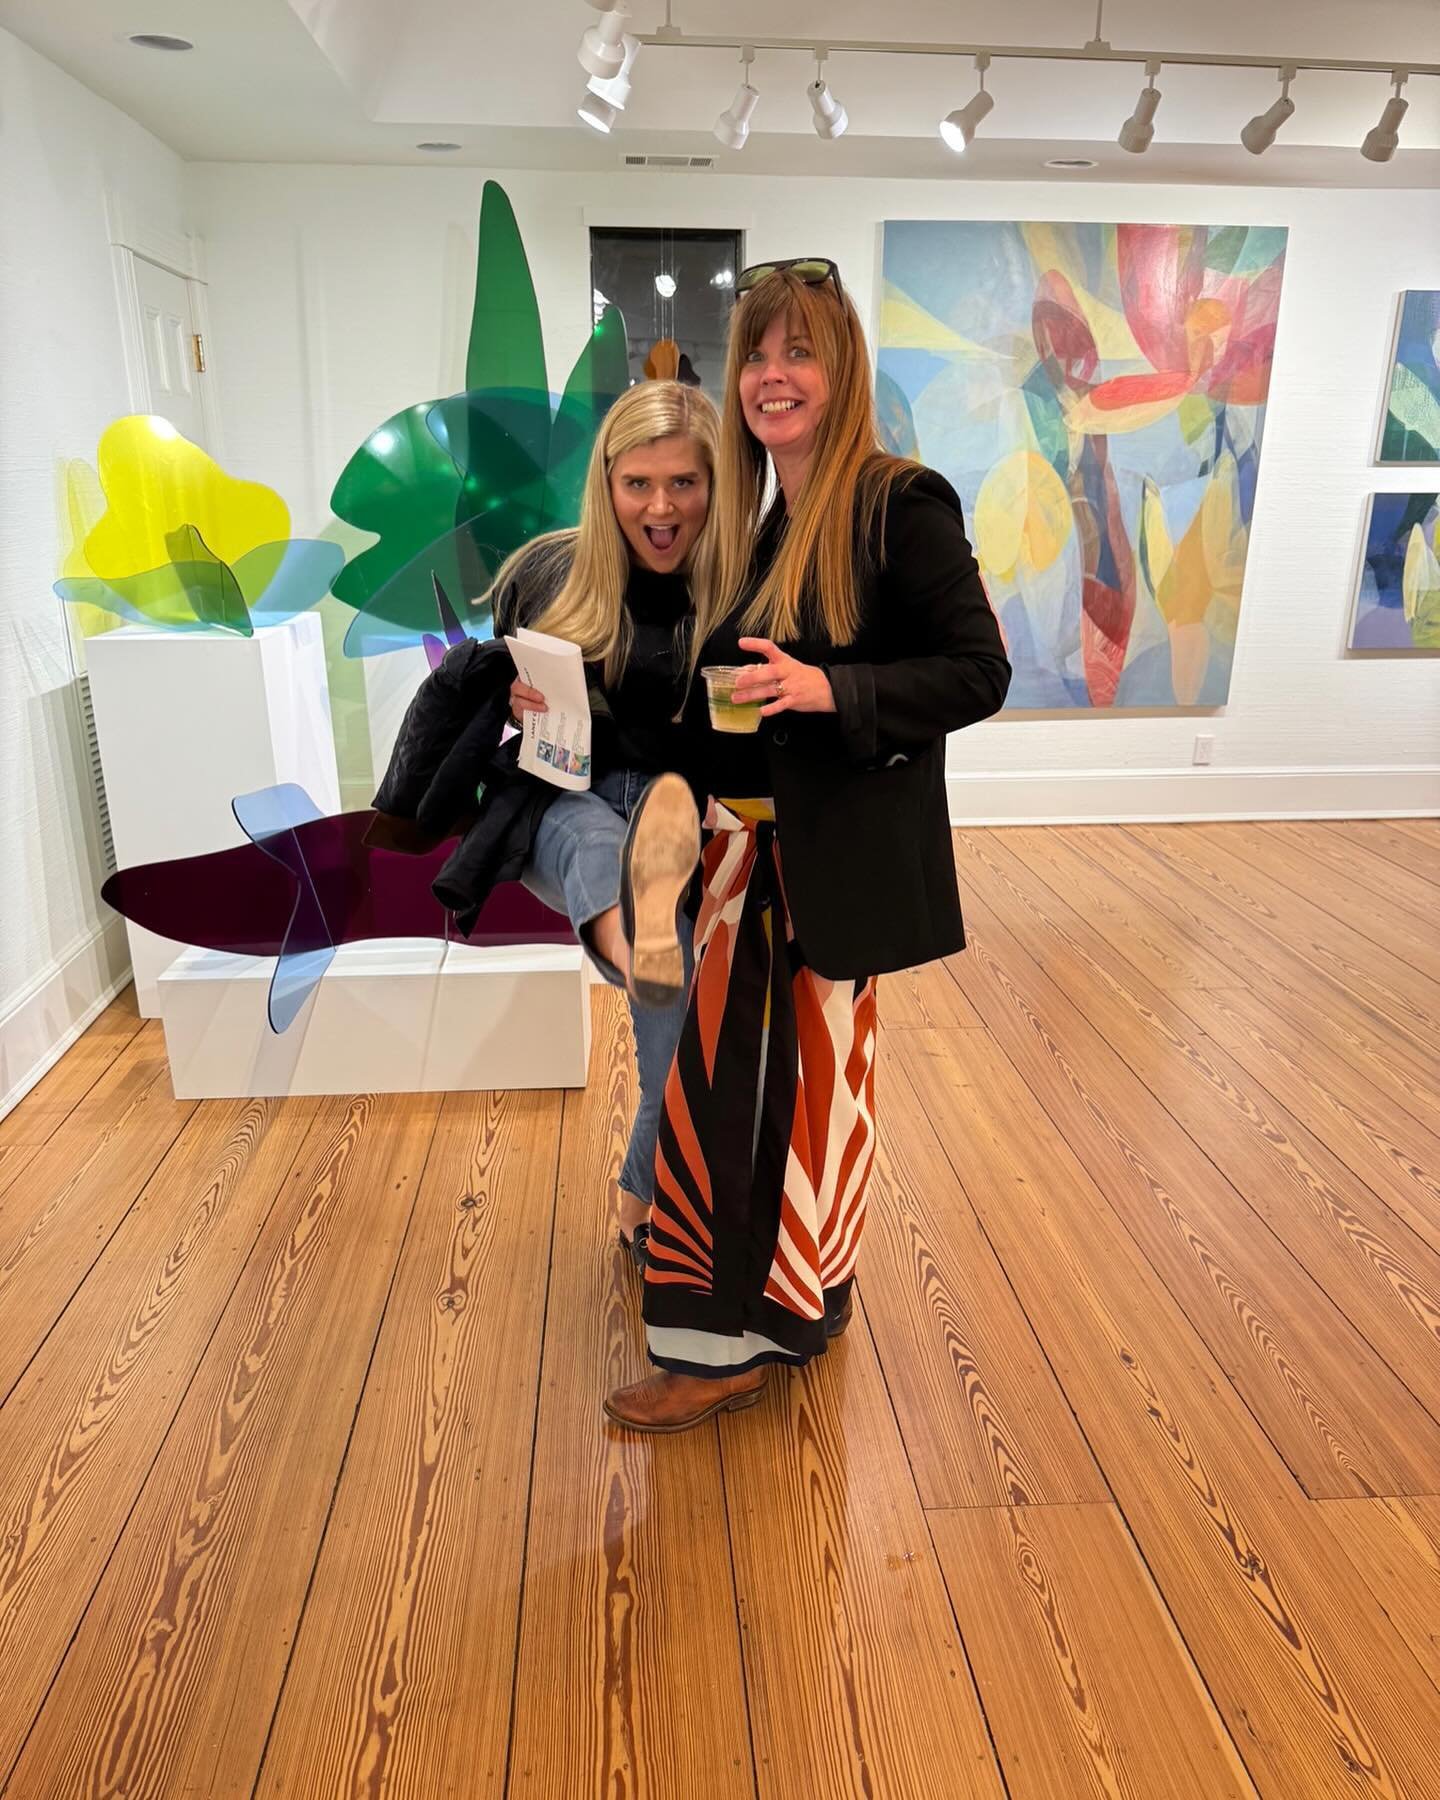 It was so much fun and an amazing experience to see Katherine Sandoz&rsquo;s exhibition opening &ldquo;Water Ways&rdquo; at Laney Contemporary in Savannah Georgia. 🤩👏🏼 Katherine&rsquo;s exhibition is up through June 1st. @katherinesandoz @laneycon